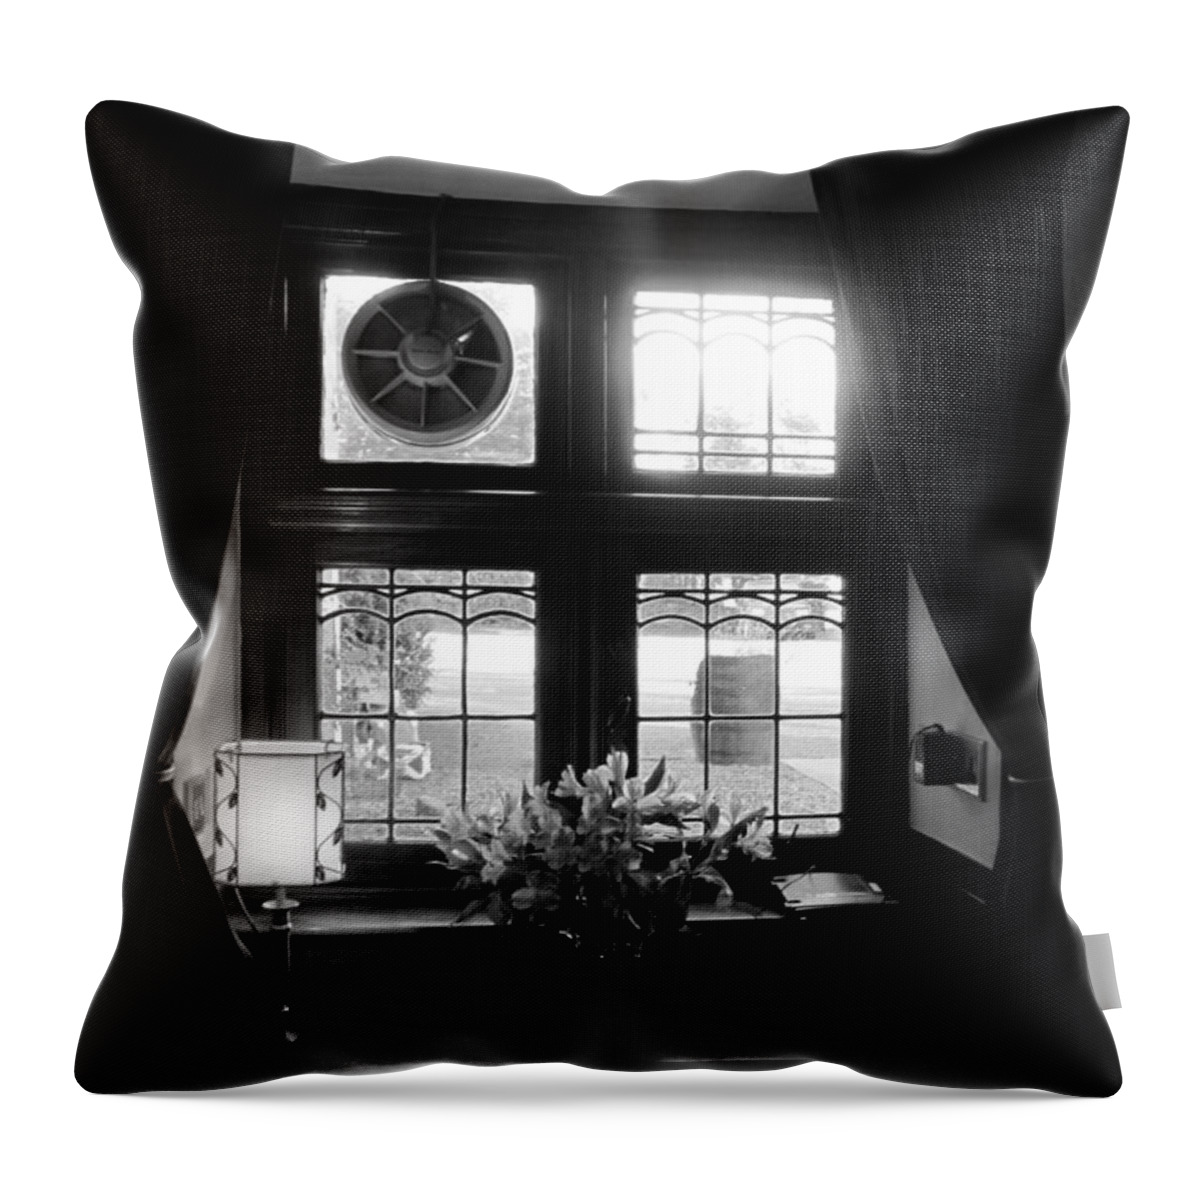  Throw Pillow featuring the photograph Pub View by Sharron Cuthbertson